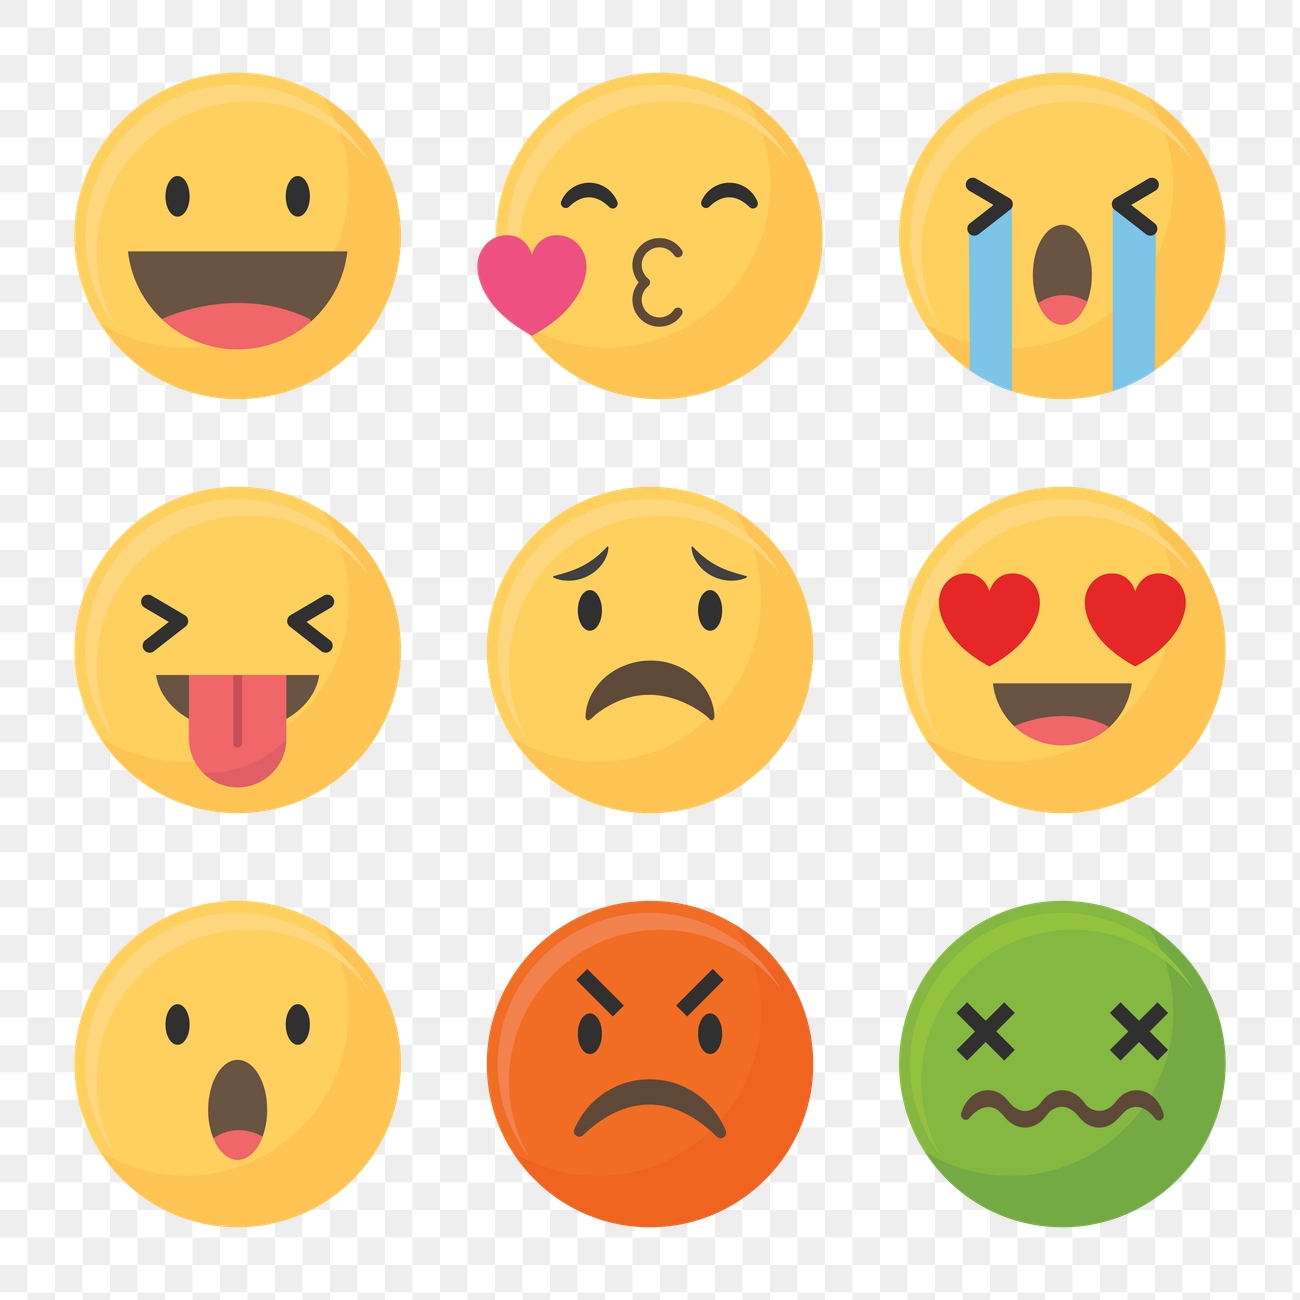 Emoji | Transparent background PNG image and graphic | rawpixel